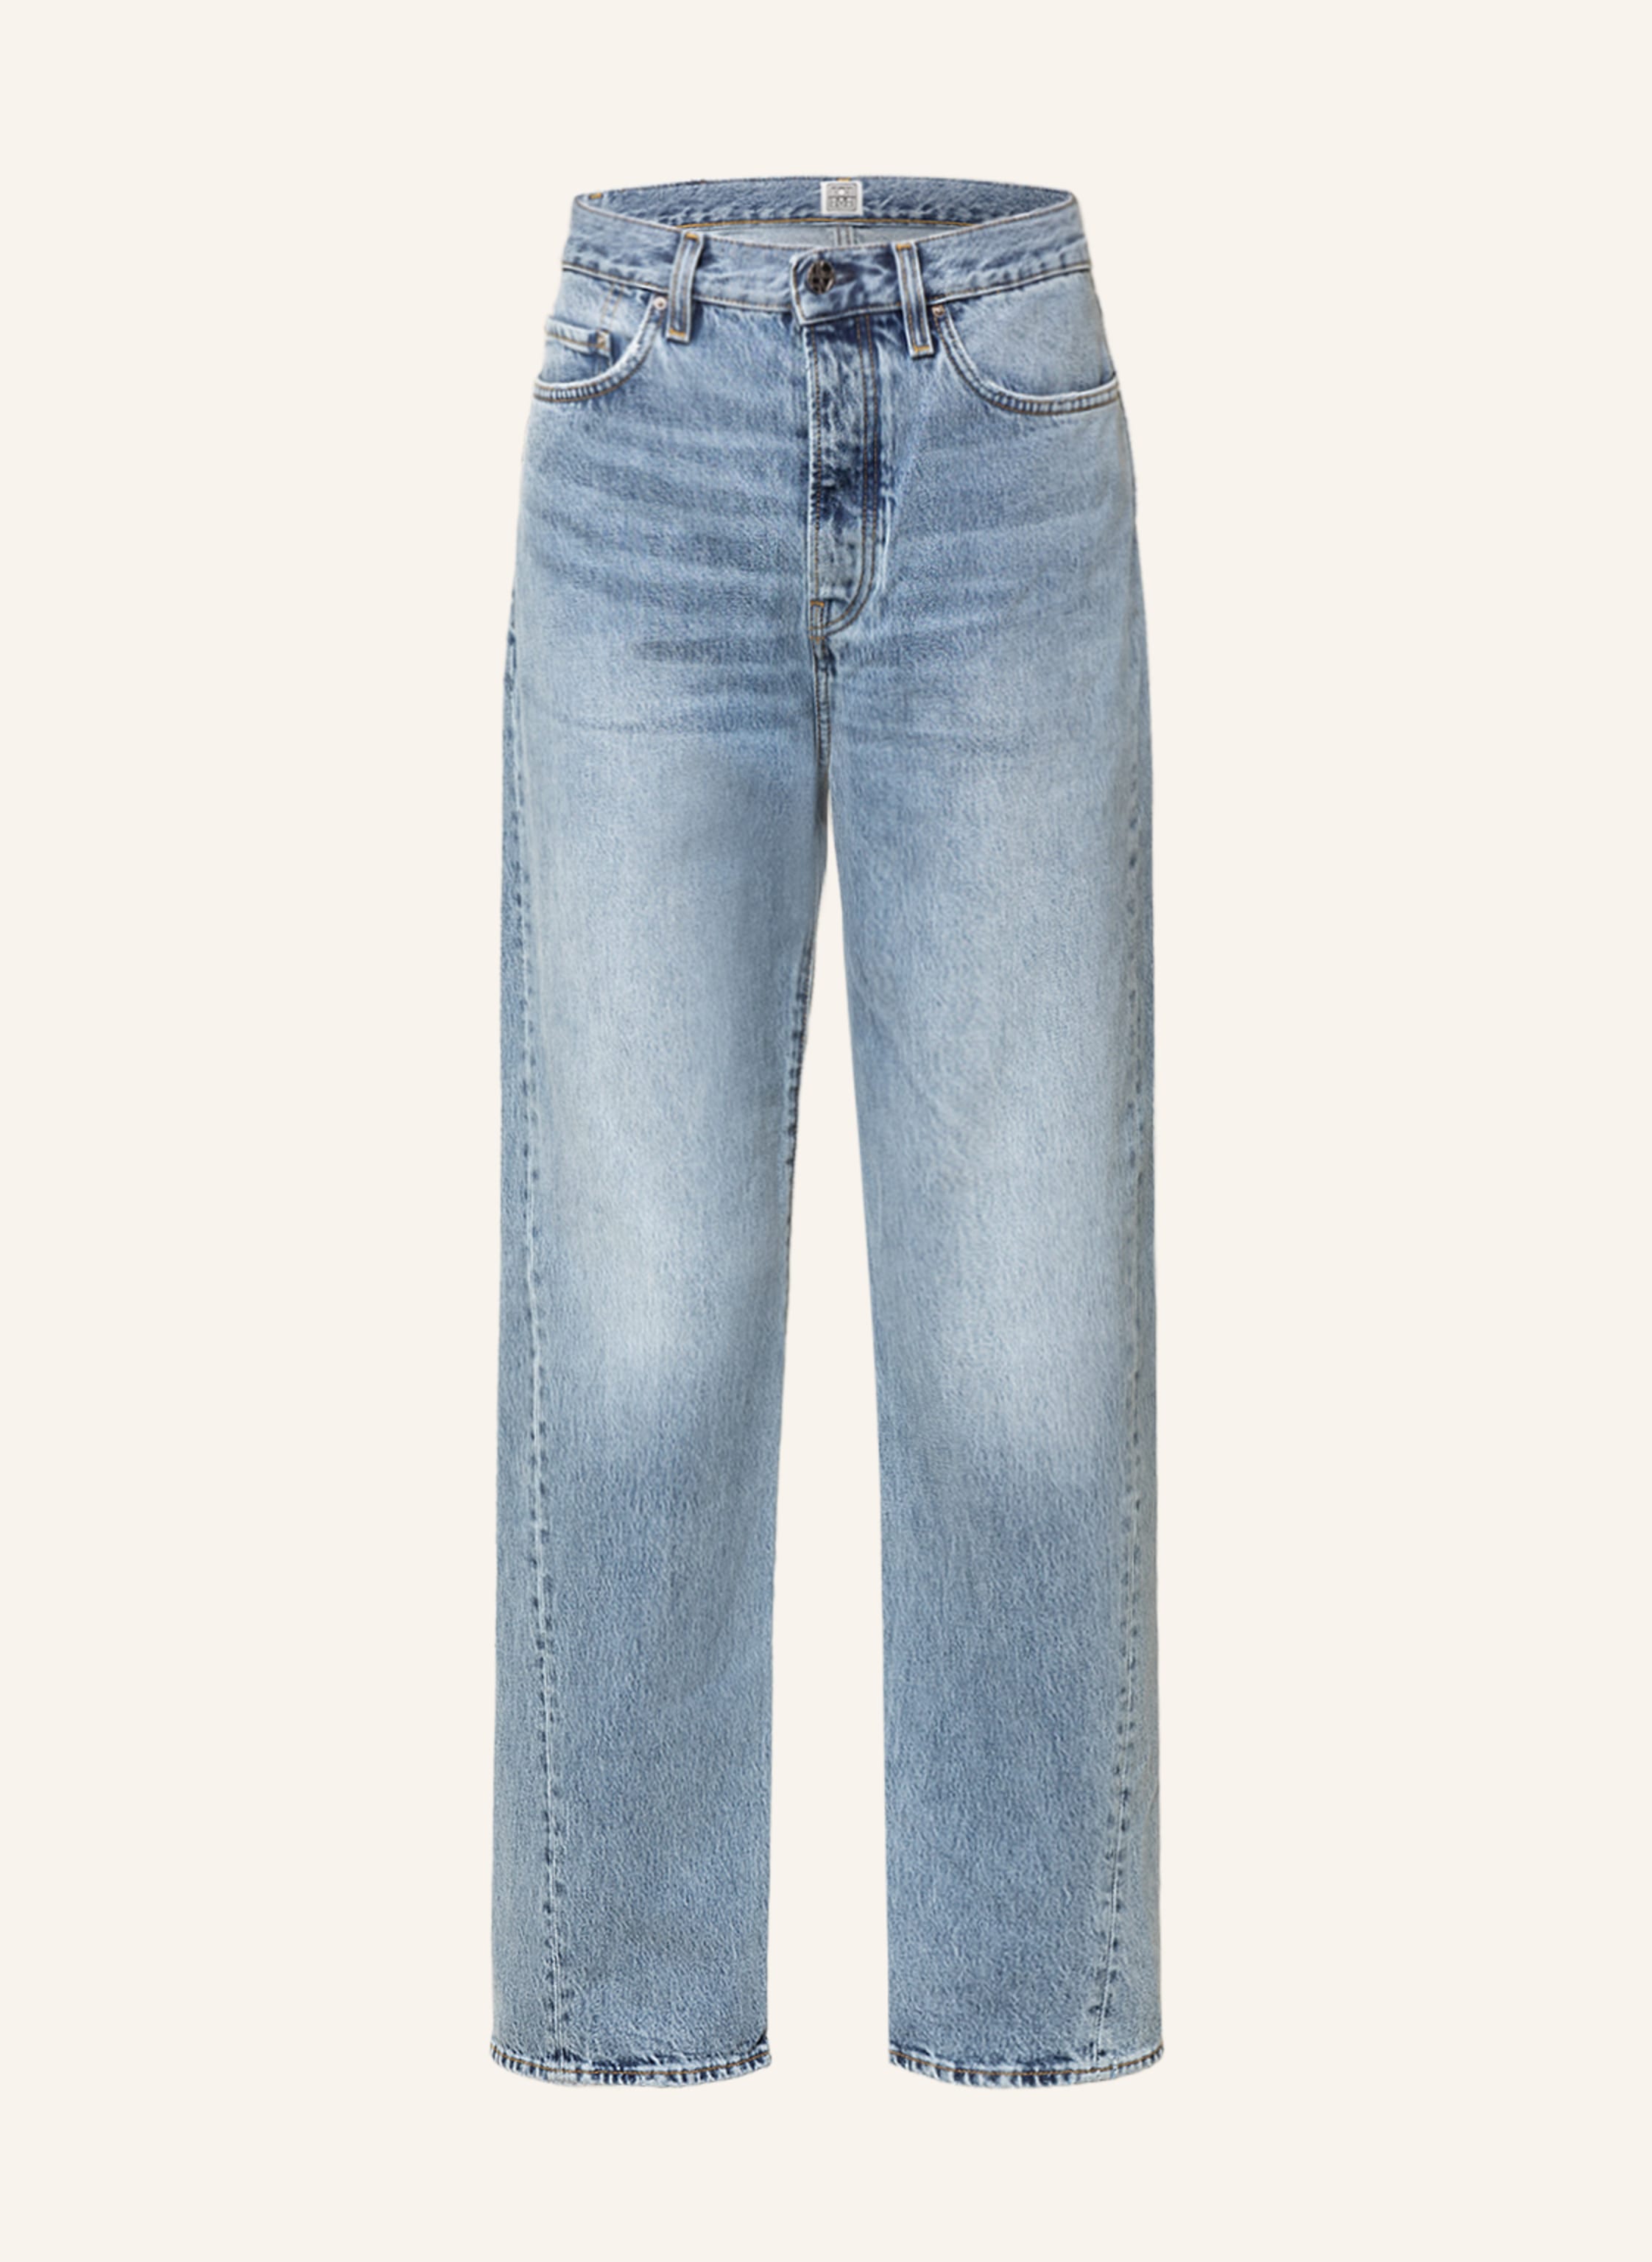 TOTEME Straight jeans in 485 worn blue